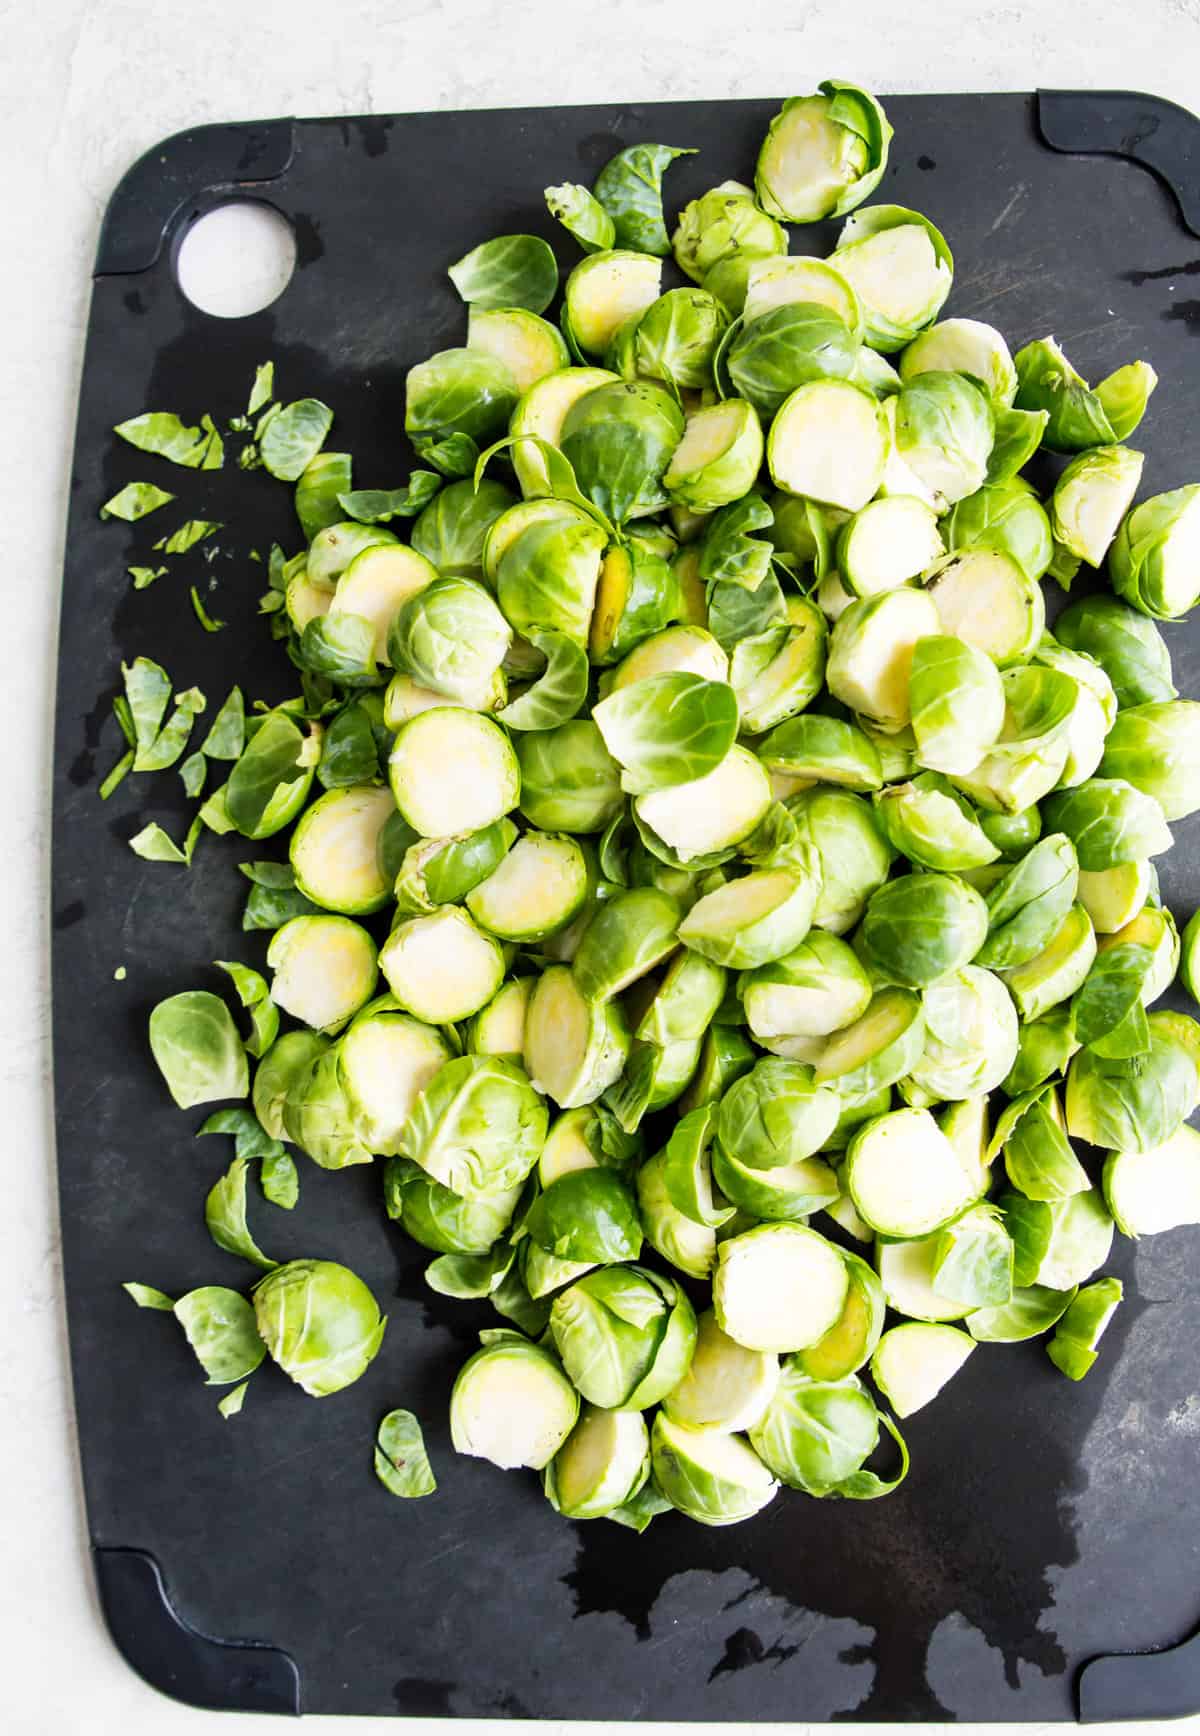 Chopped Brussels sprouts on a black cutting board. 